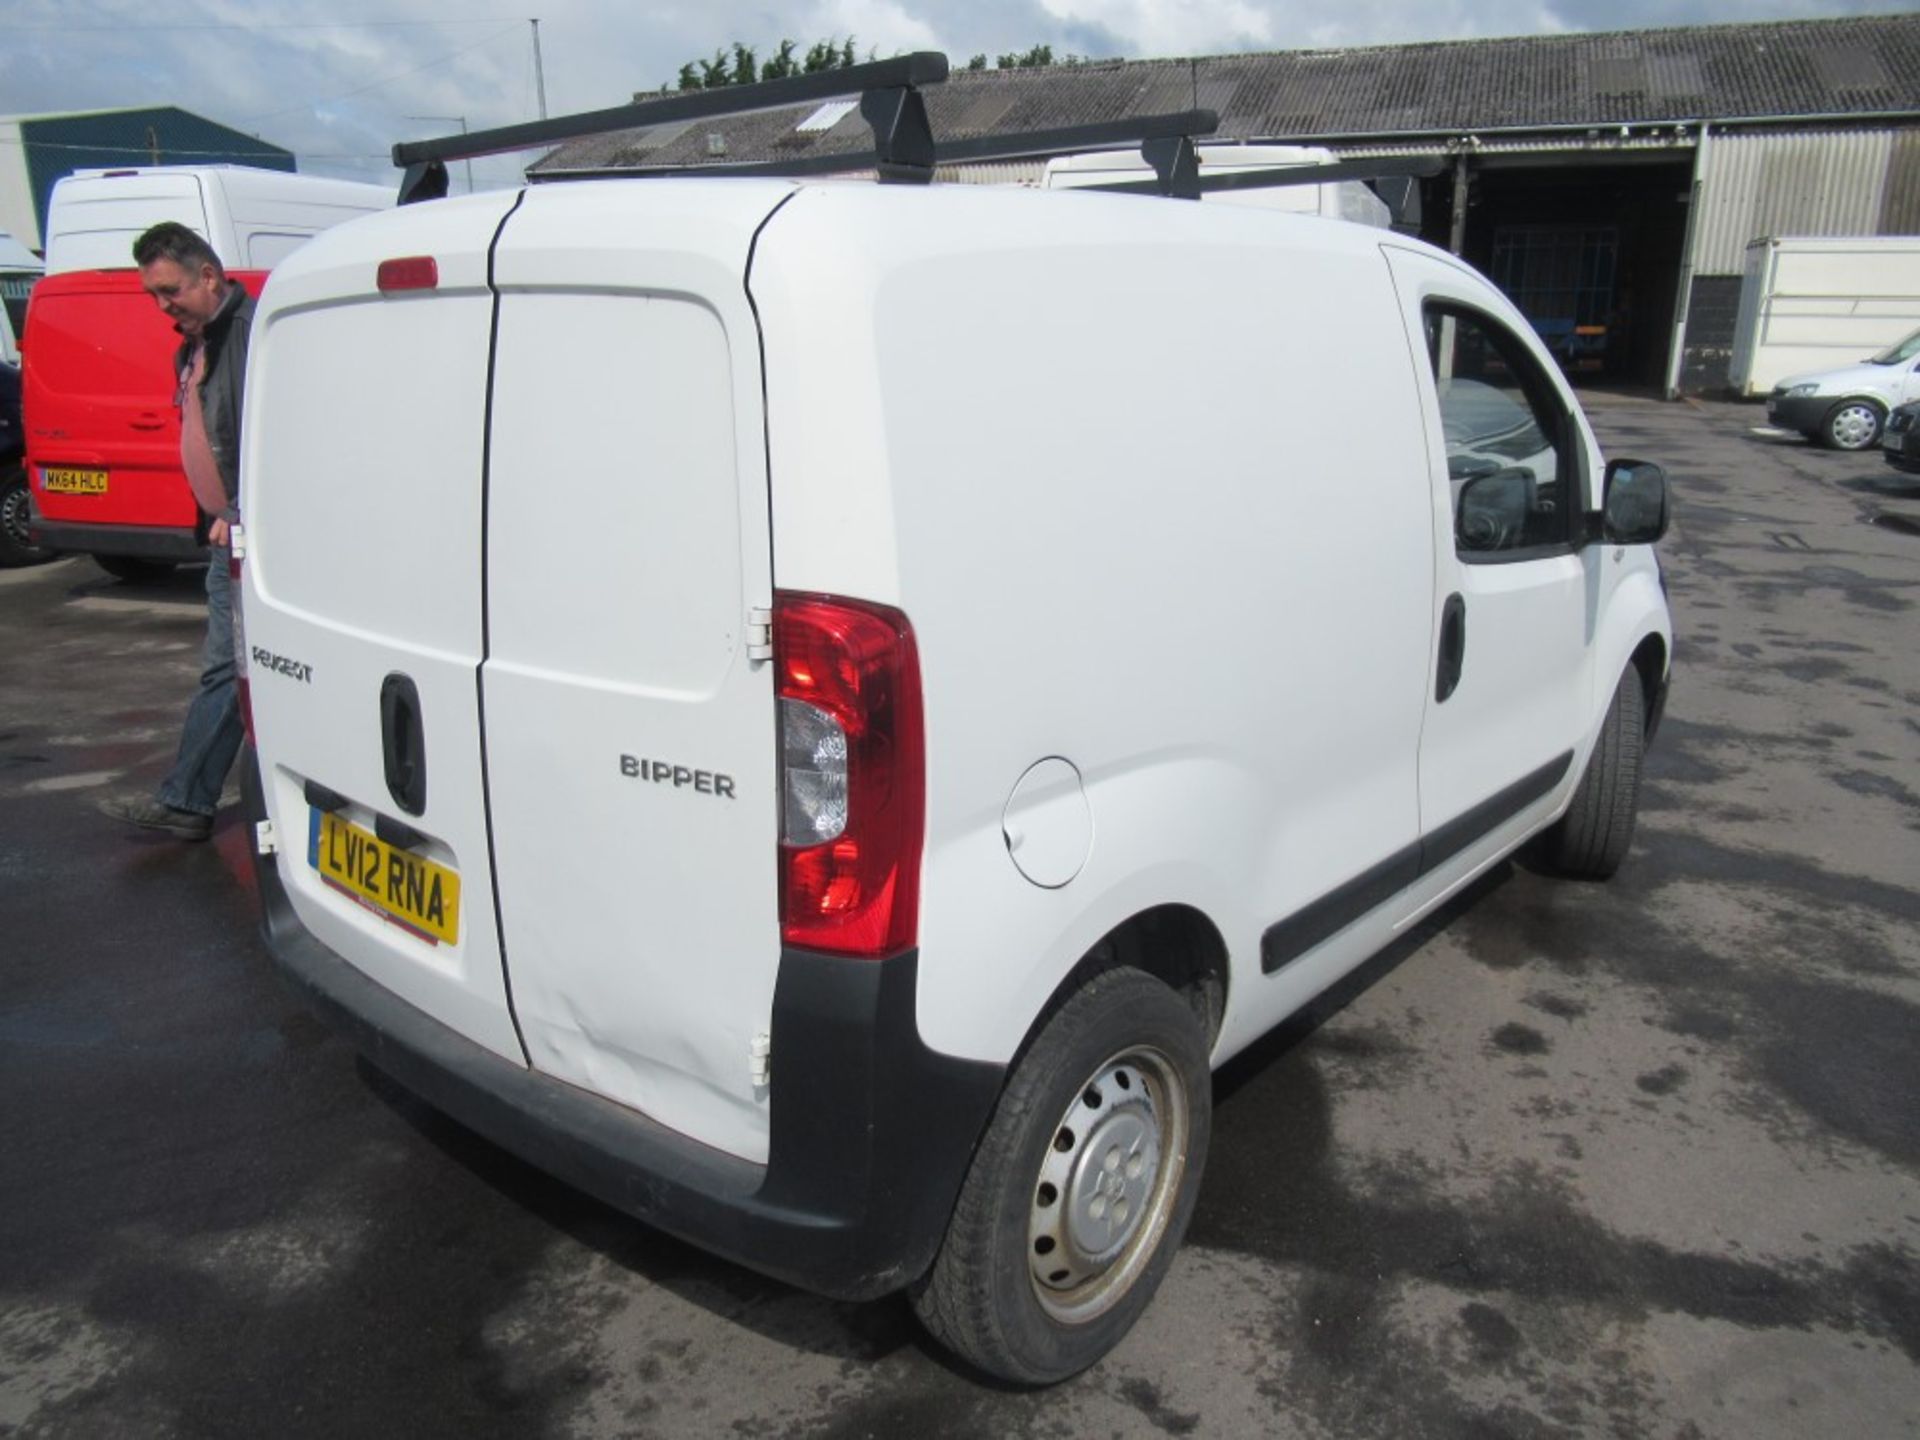 12 reg PEUGEOT BIPPER S HDI VAN, 1ST REG 04/12, TEST 09/19, 65875M, V5 HERE, 4 FORMER KEEPERS [NO - Image 4 of 5